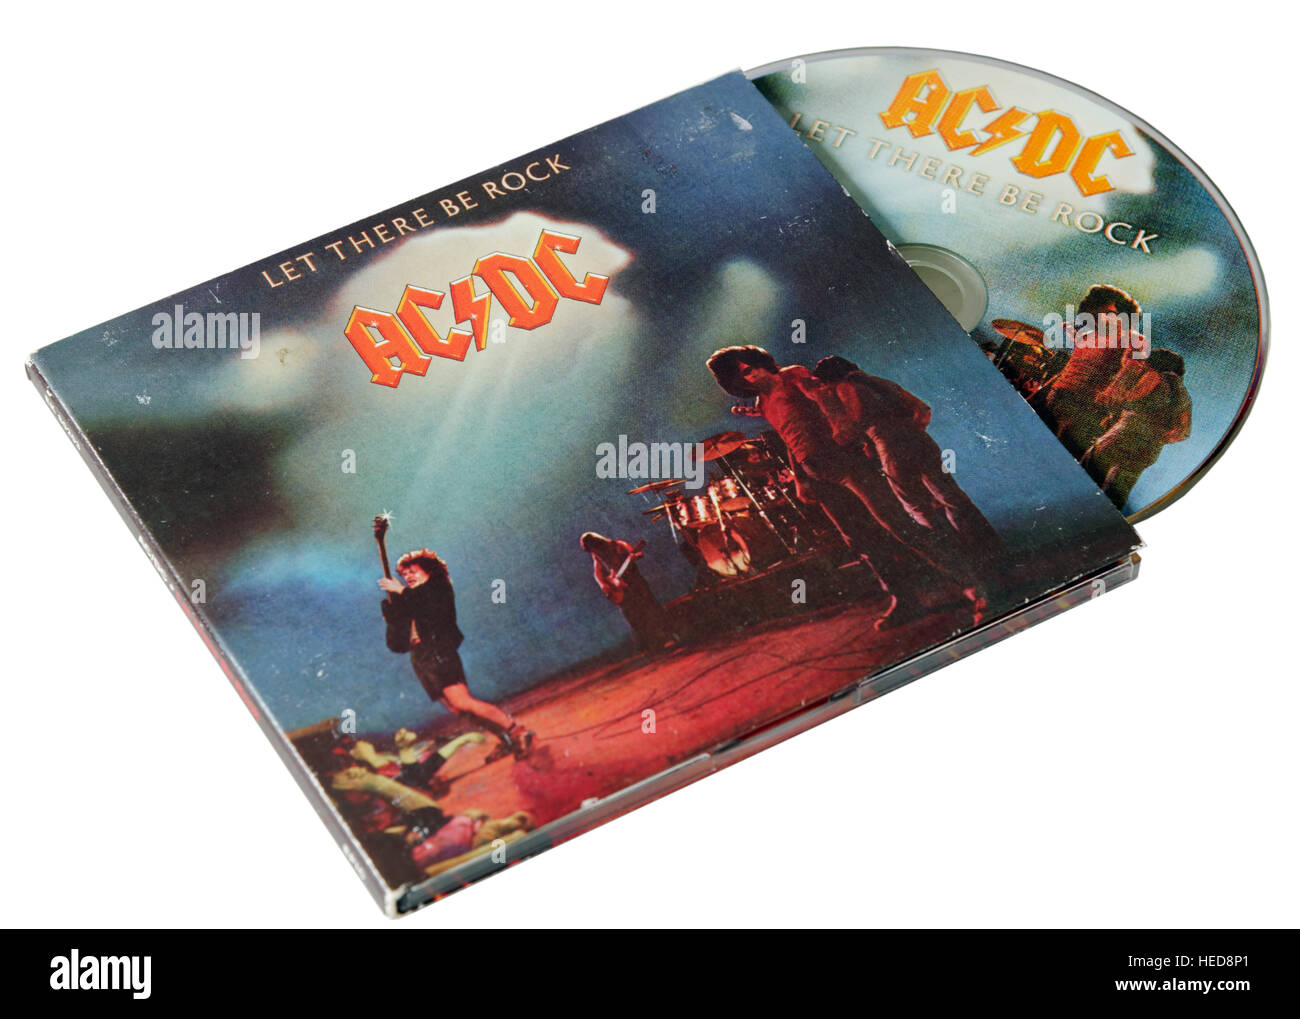 AC/DC Let There Be Rock CD Banque D'Images